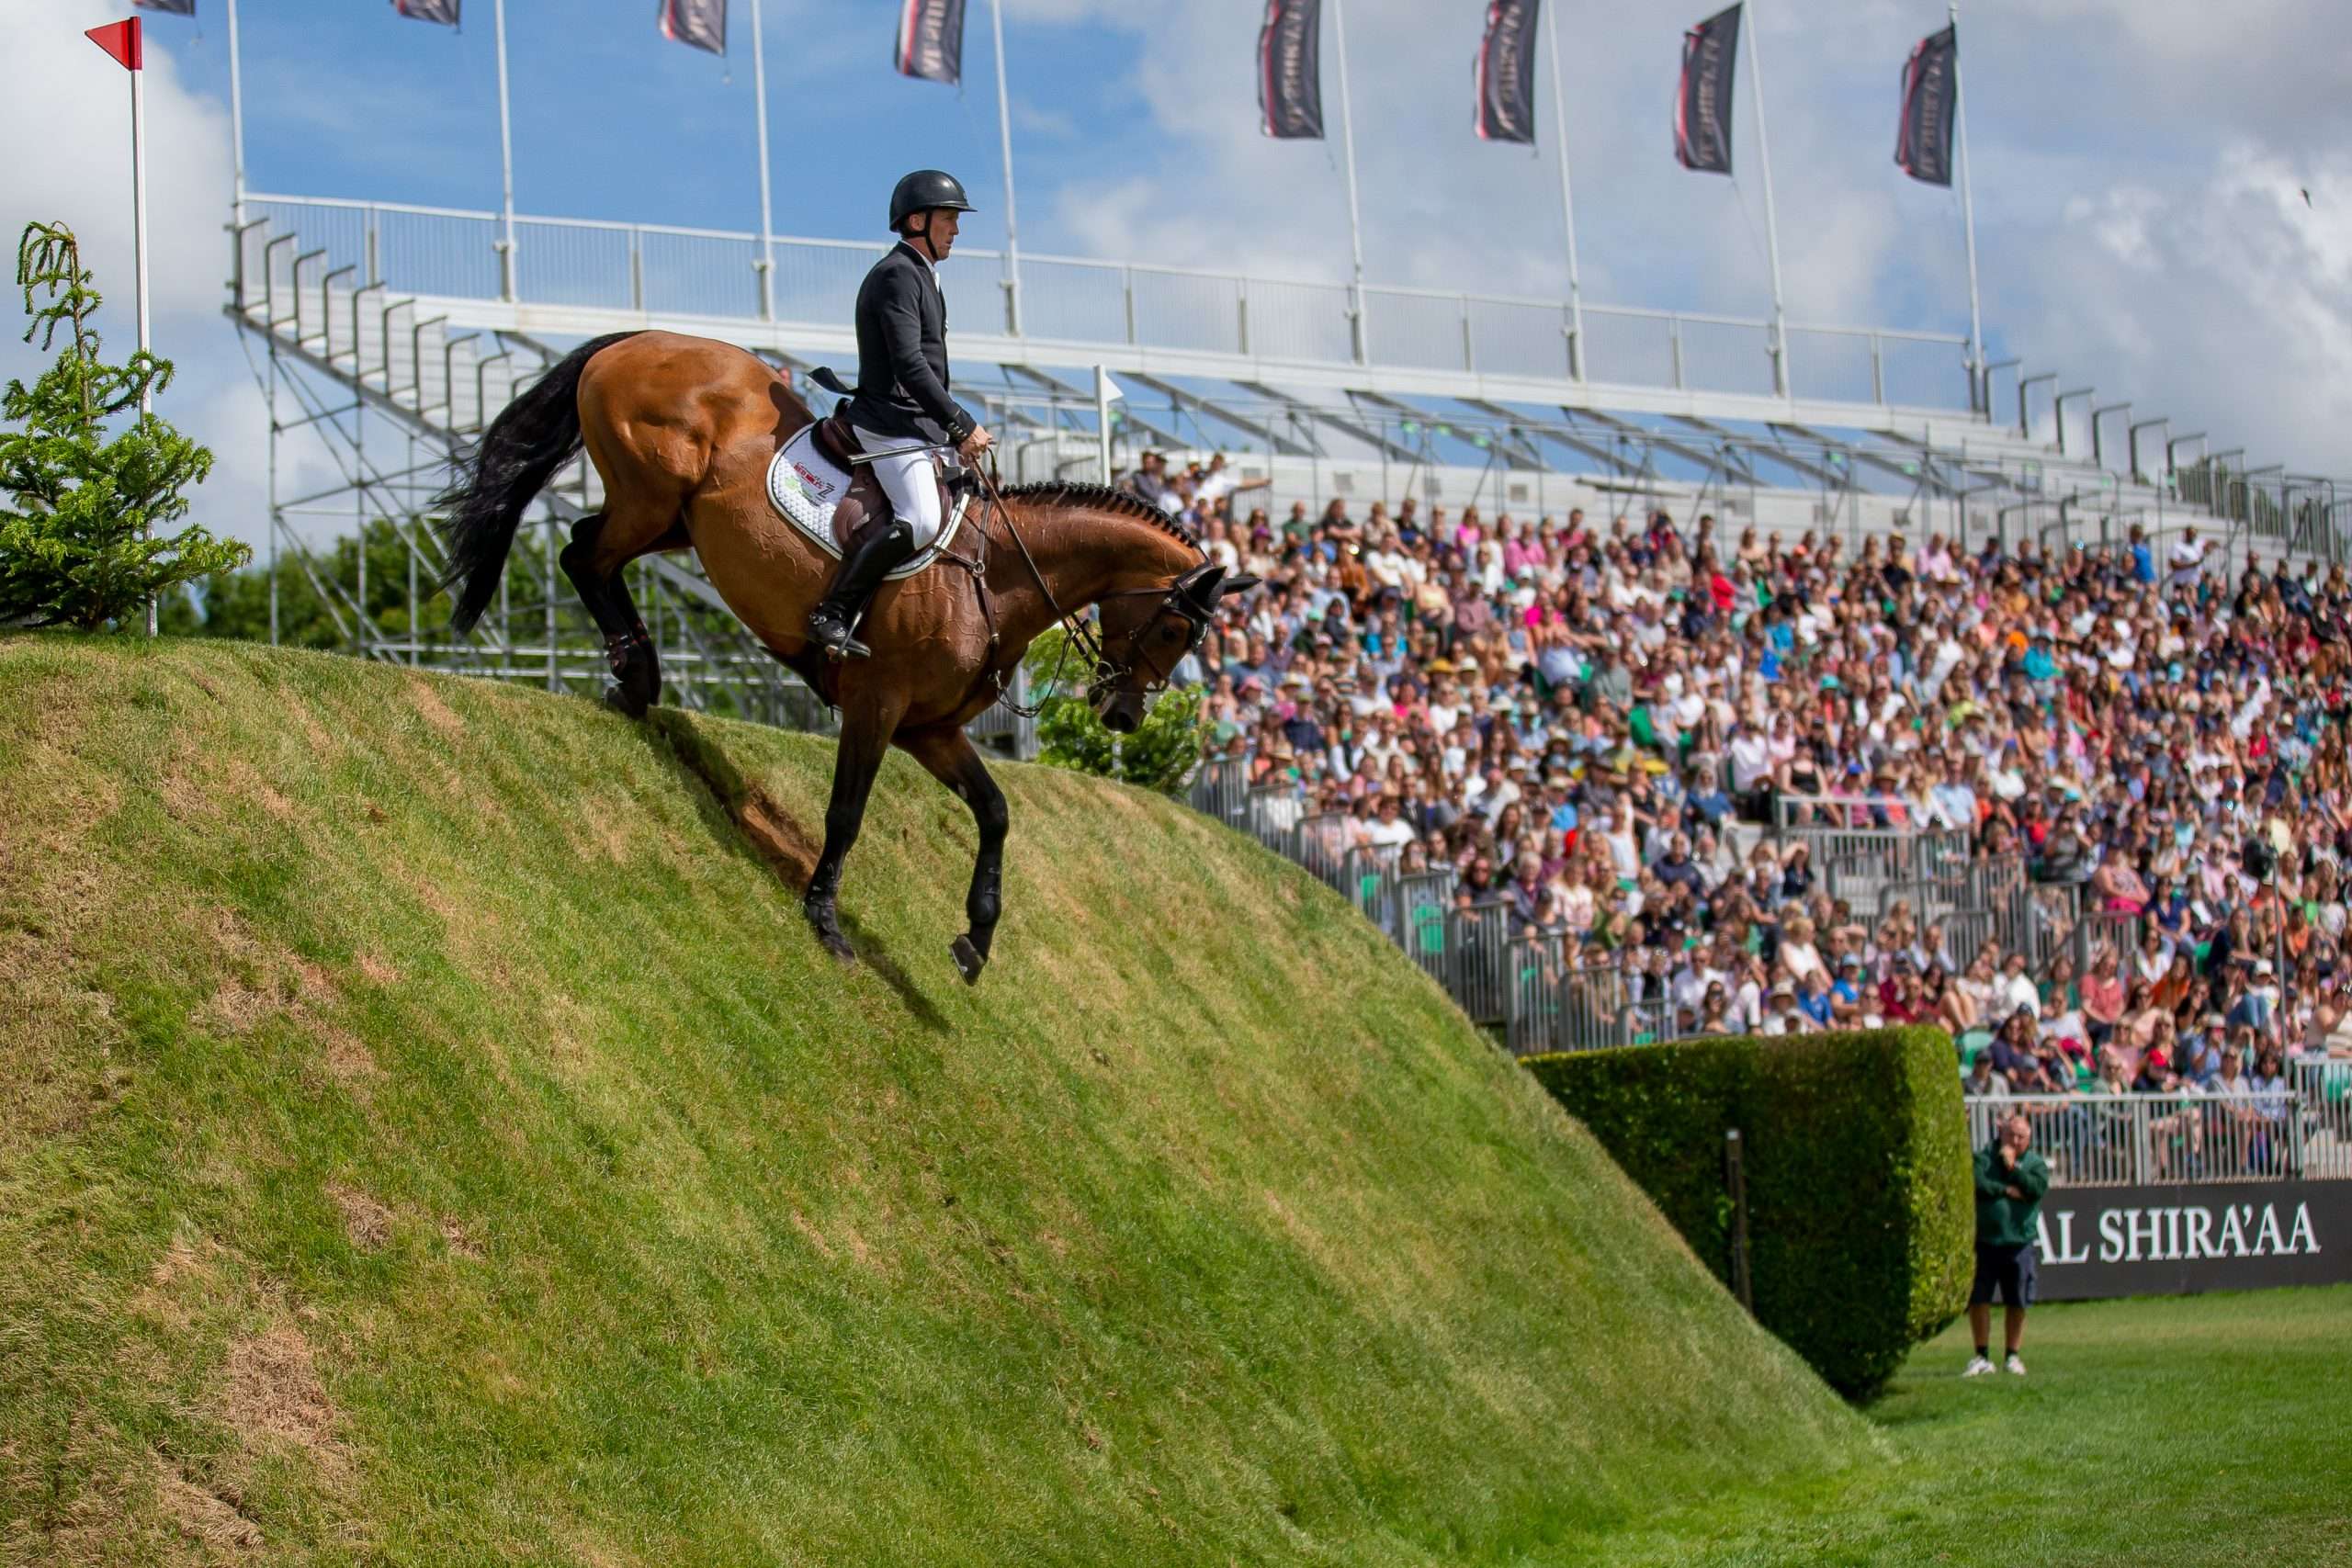 Winner. Shane Been (IRL) riding Can Ya Makan in The Al Shira’aa Derby at The Al Shira'aa Hickstead Derby Meeting June 26th 2022 ~ MANDATORY Credit Elli Birch/Bootsandhooves - NO UNAUTHORISED USE - 07745 909676